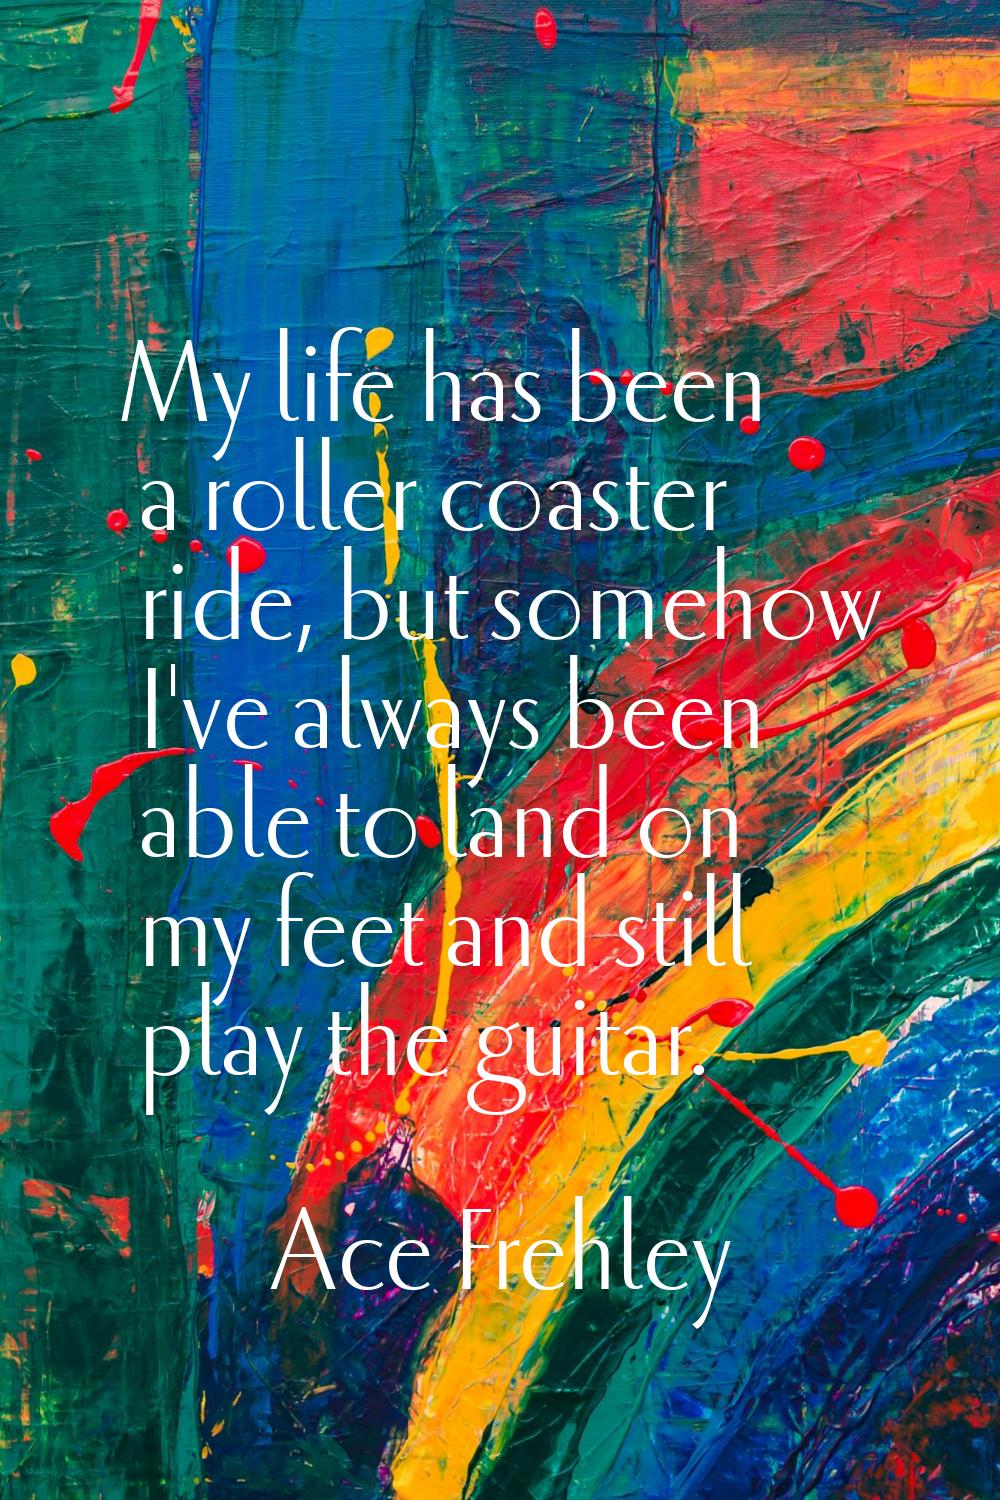 My life has been a roller coaster ride, but somehow I've always been able to land on my feet and st